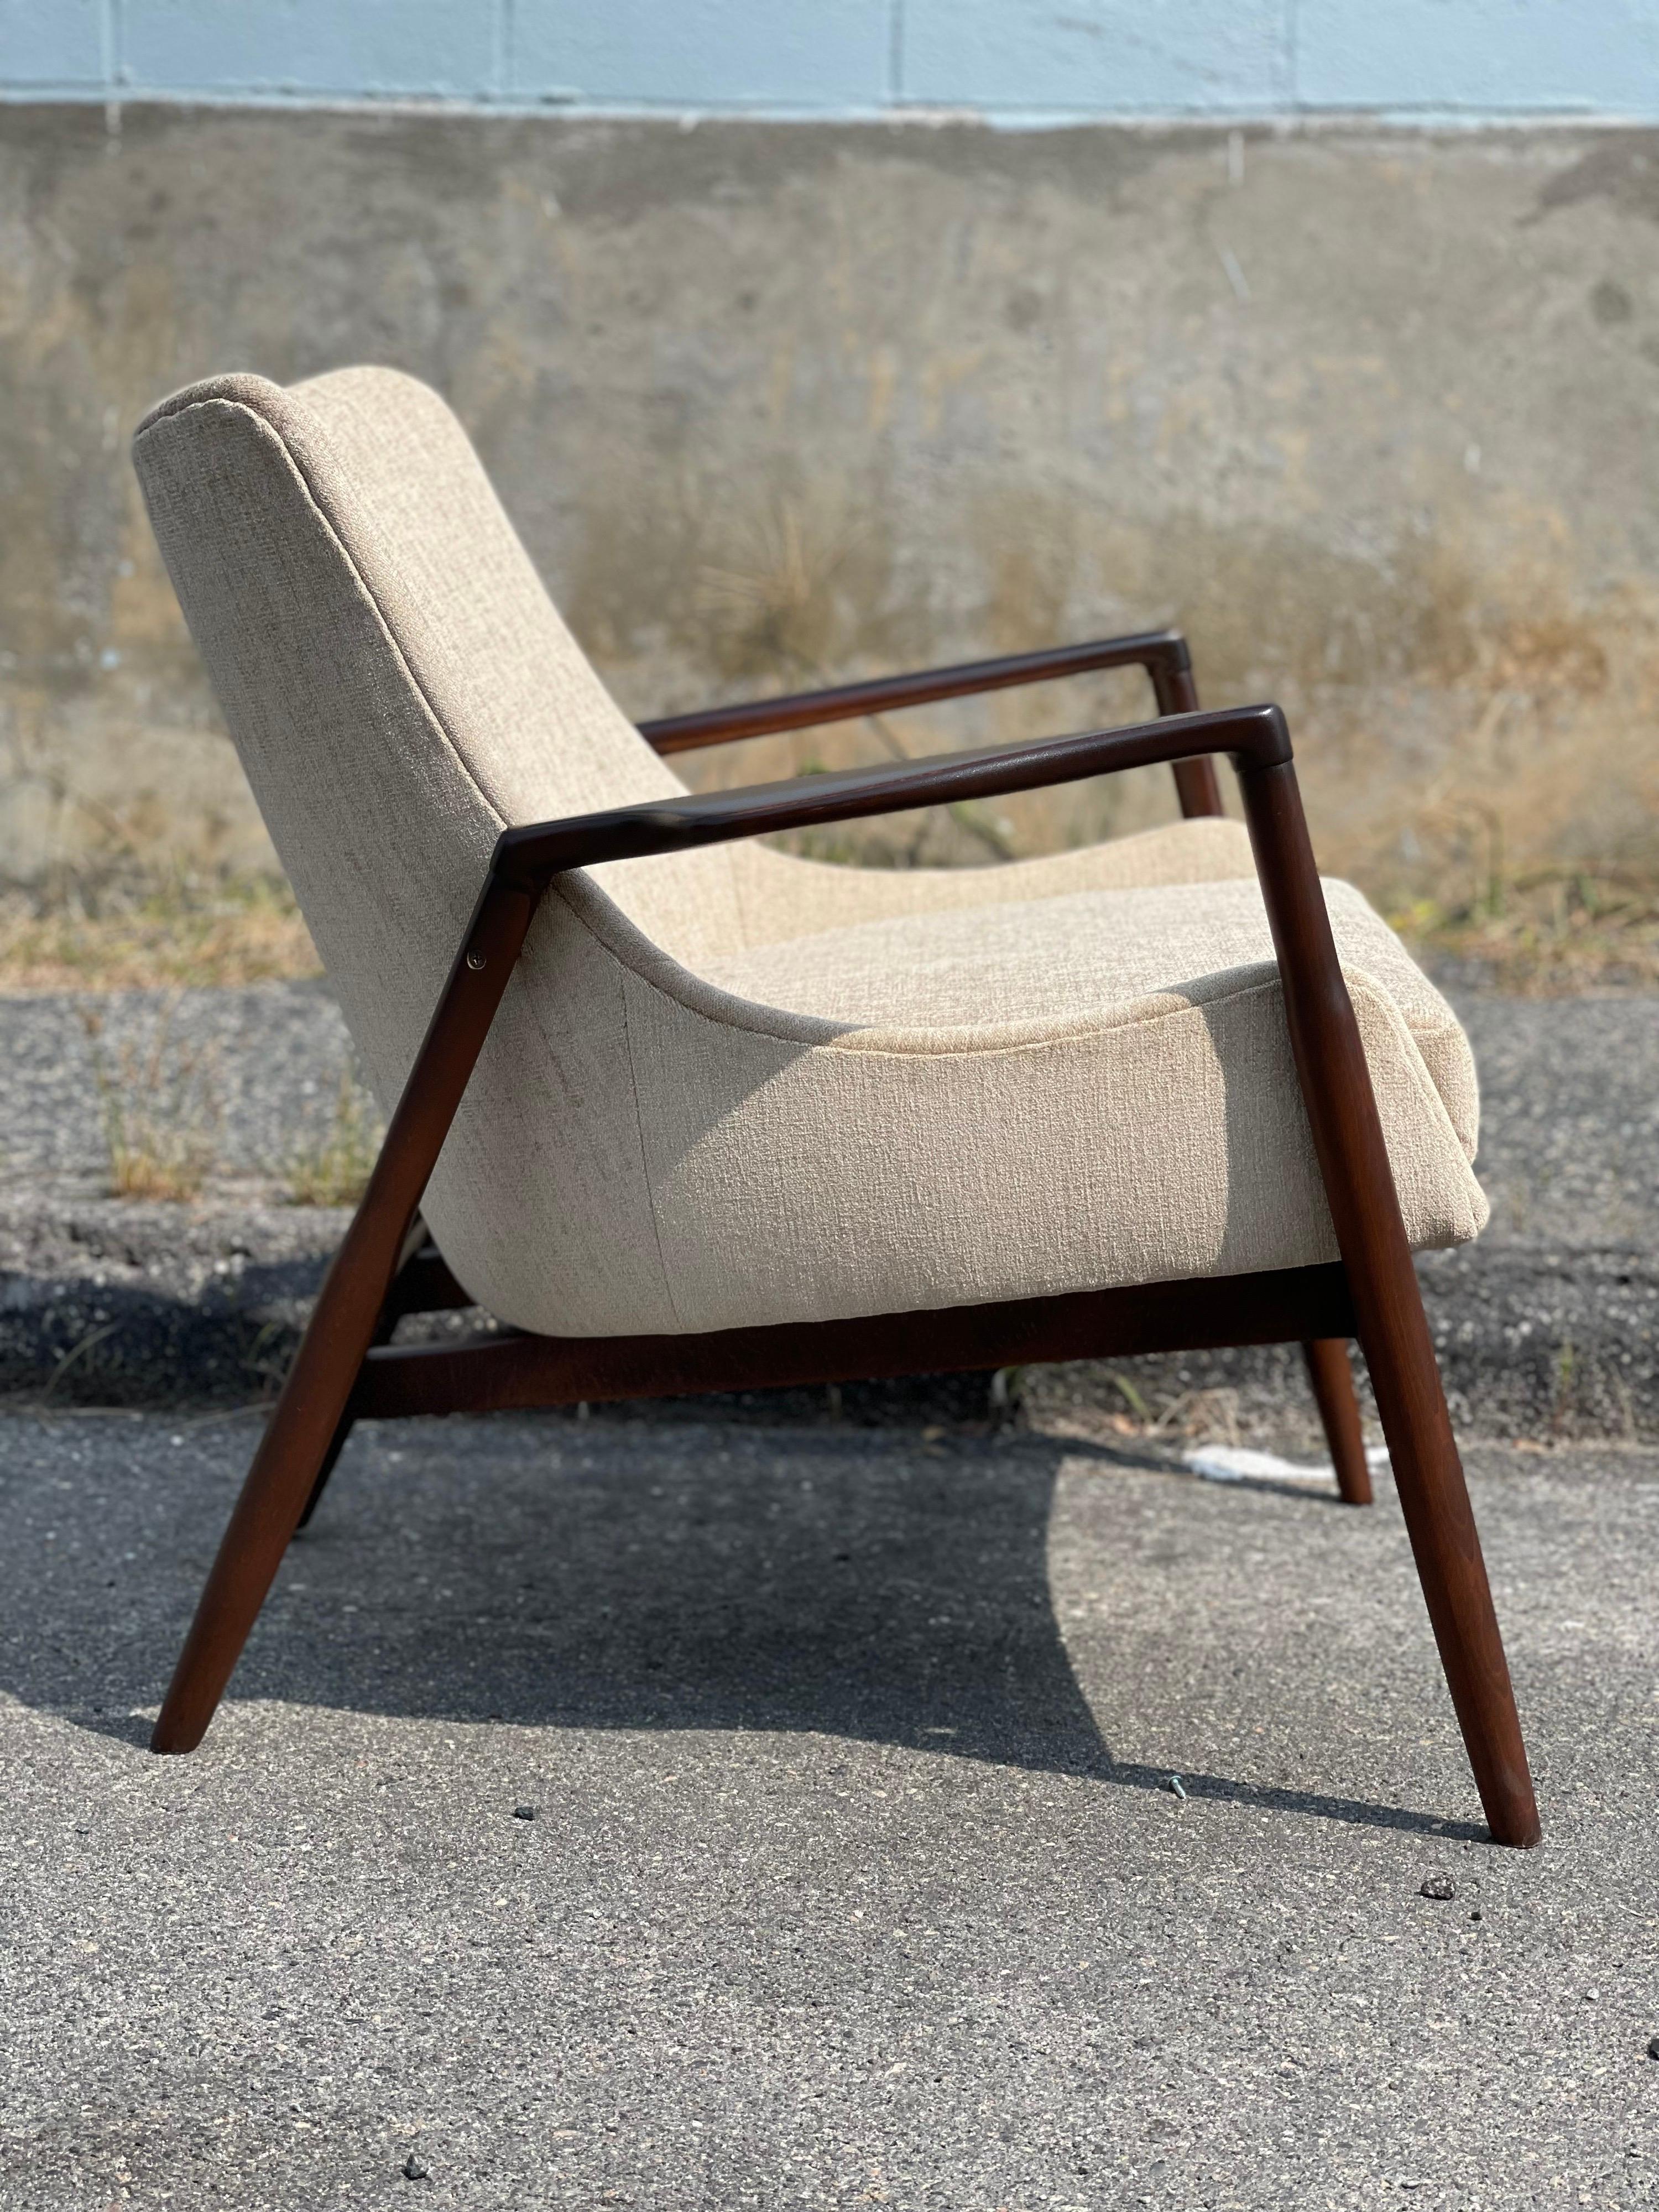 Classic eye-catching Danish Modern Seal style lounge chair by Ib Kofod-Larsen for Selig. This version of this chair is my favorite because of the wide flared armrests. Made of Beech and fabric. The frame has been restored. The seat has new